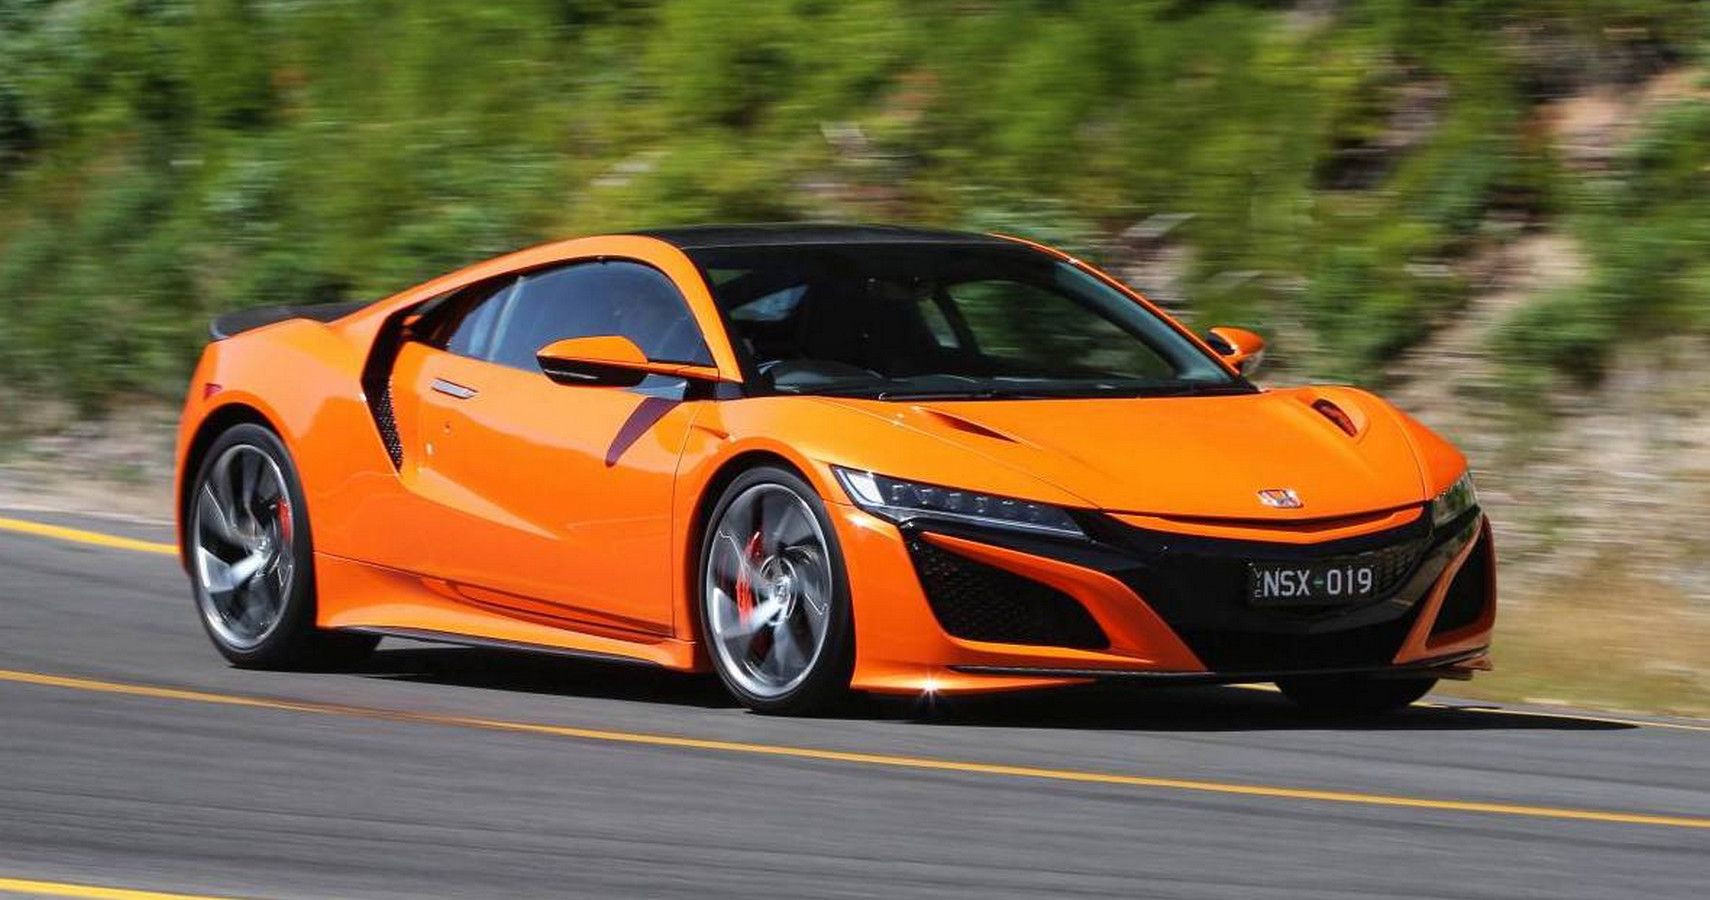 10 Reasons Why The Original Honda NSX Is The Coolest JDM Ever Made